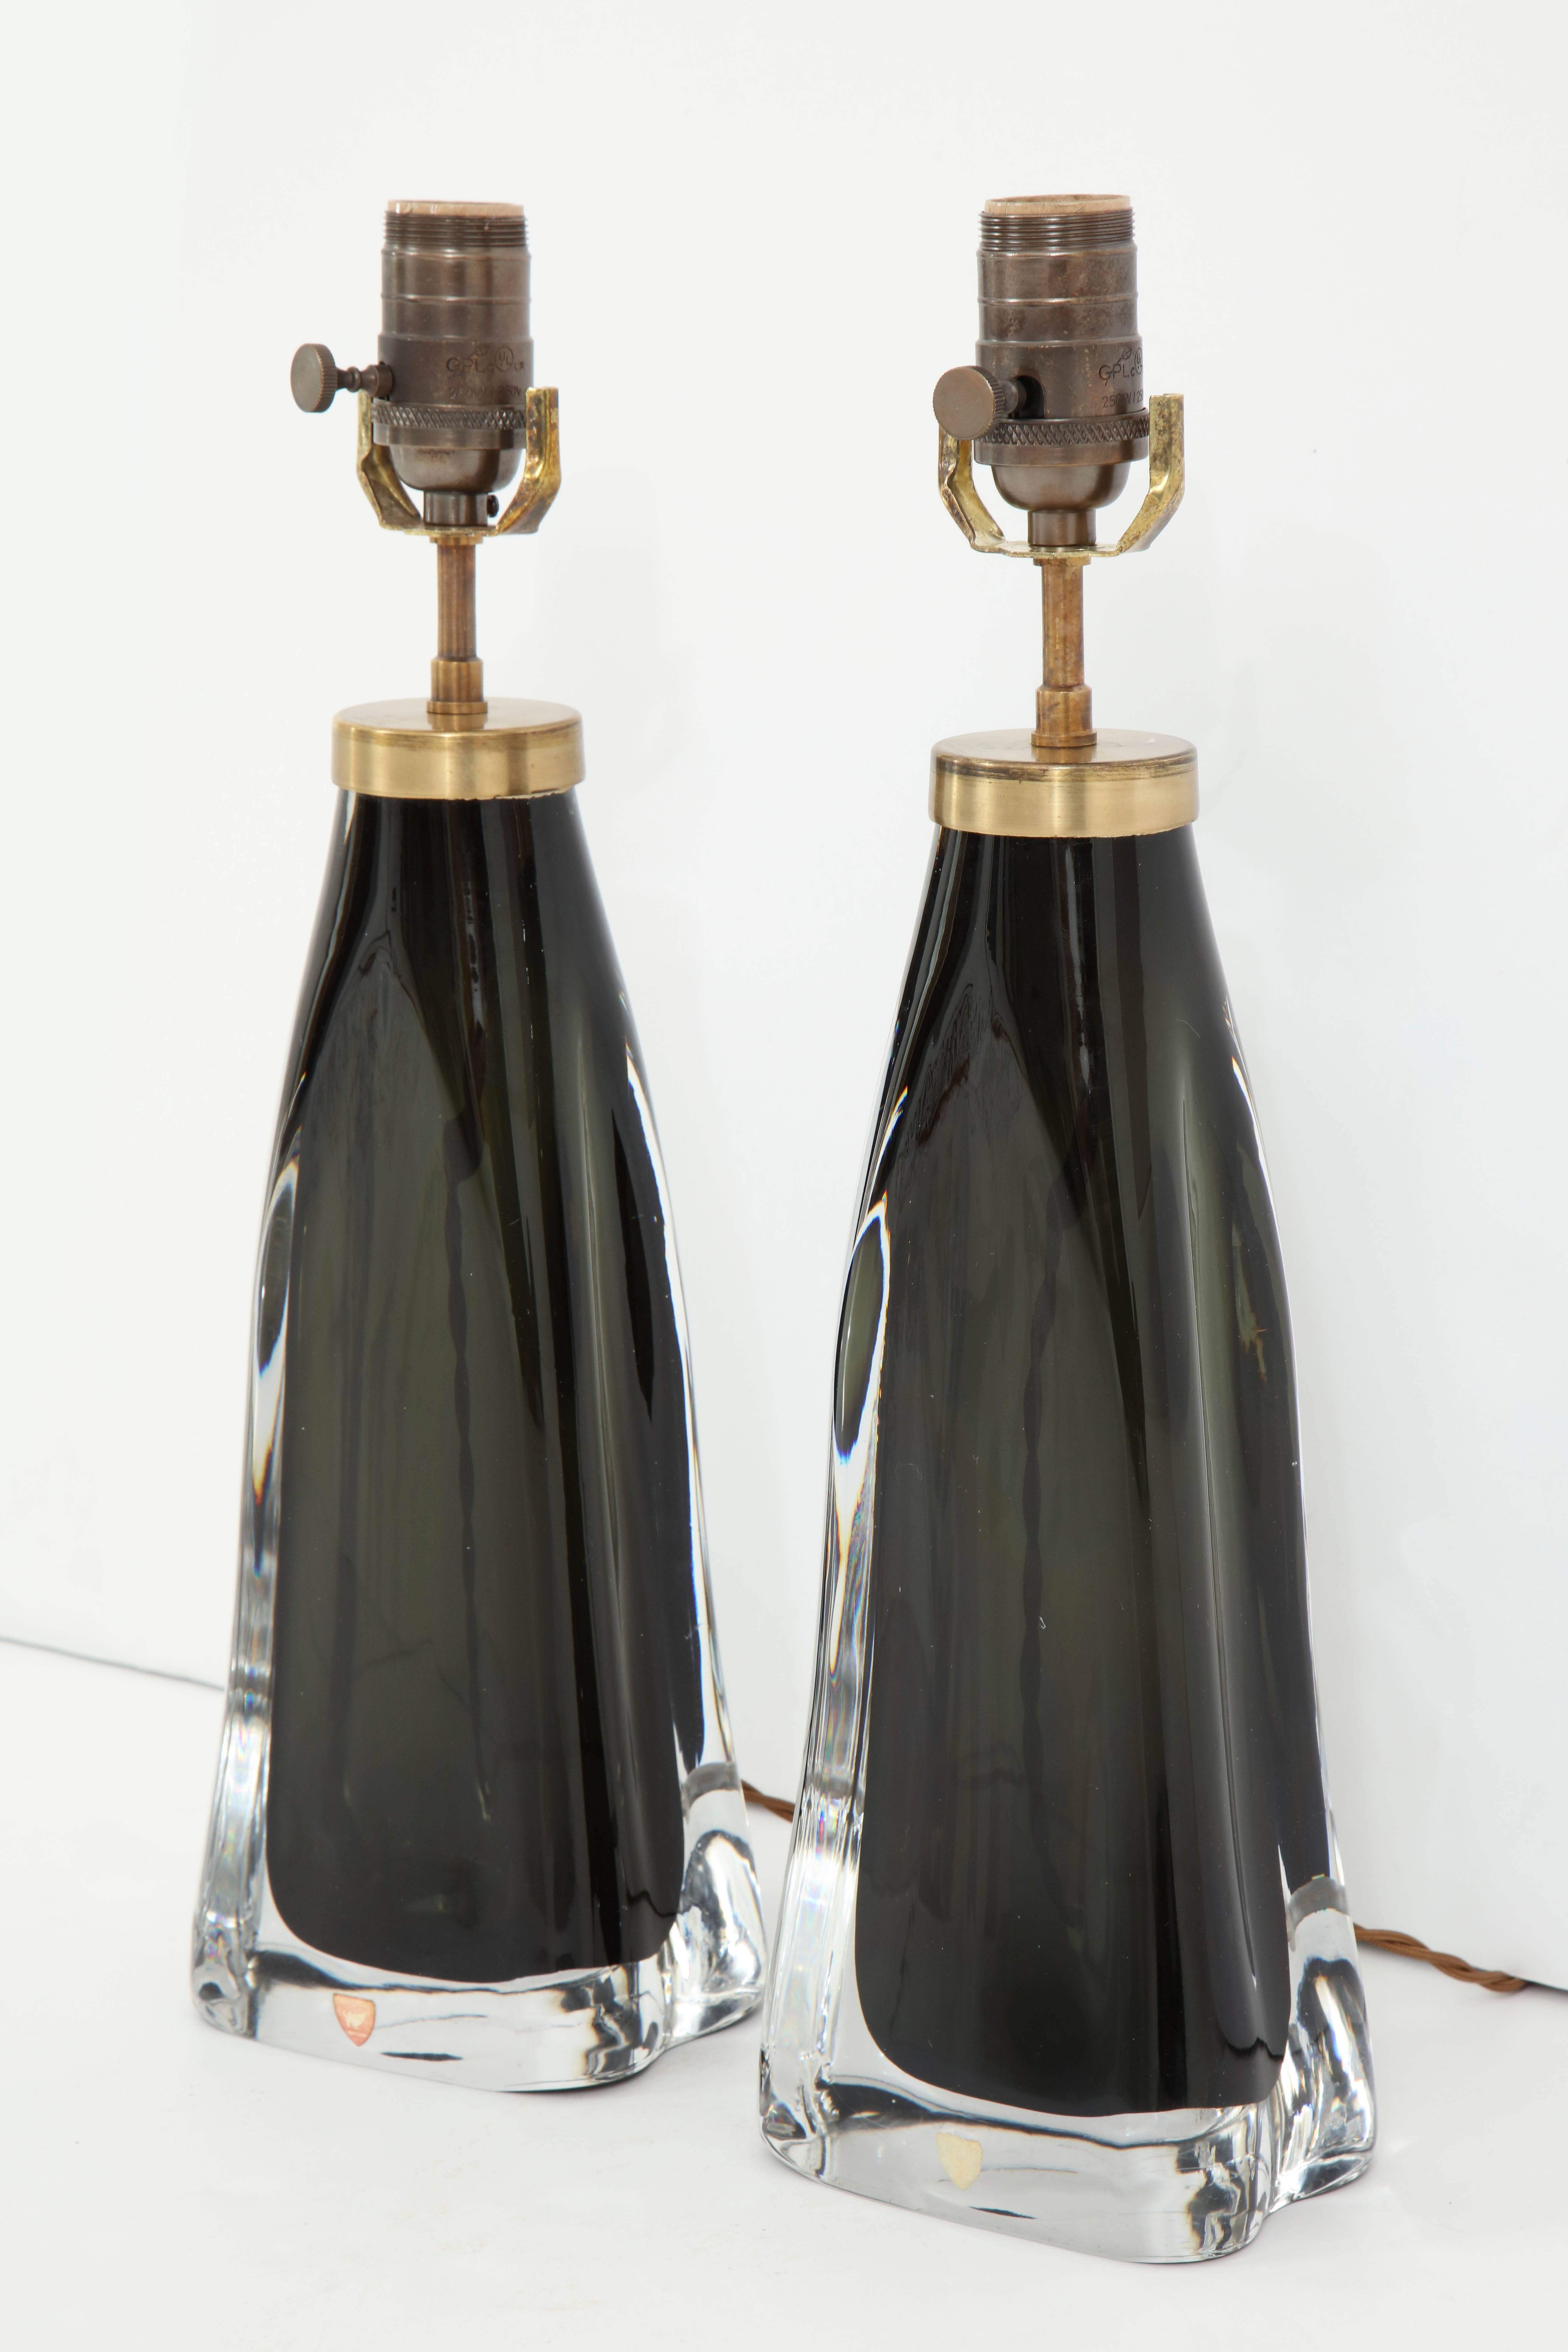 A pair of crystal lamps produced by Orrefors, Sweden, in a stunning midnight blue. The lamps have been recently re-wired for use in the U.S. and have brass fittings with cloth cords. Height listed is to bottom of harp.